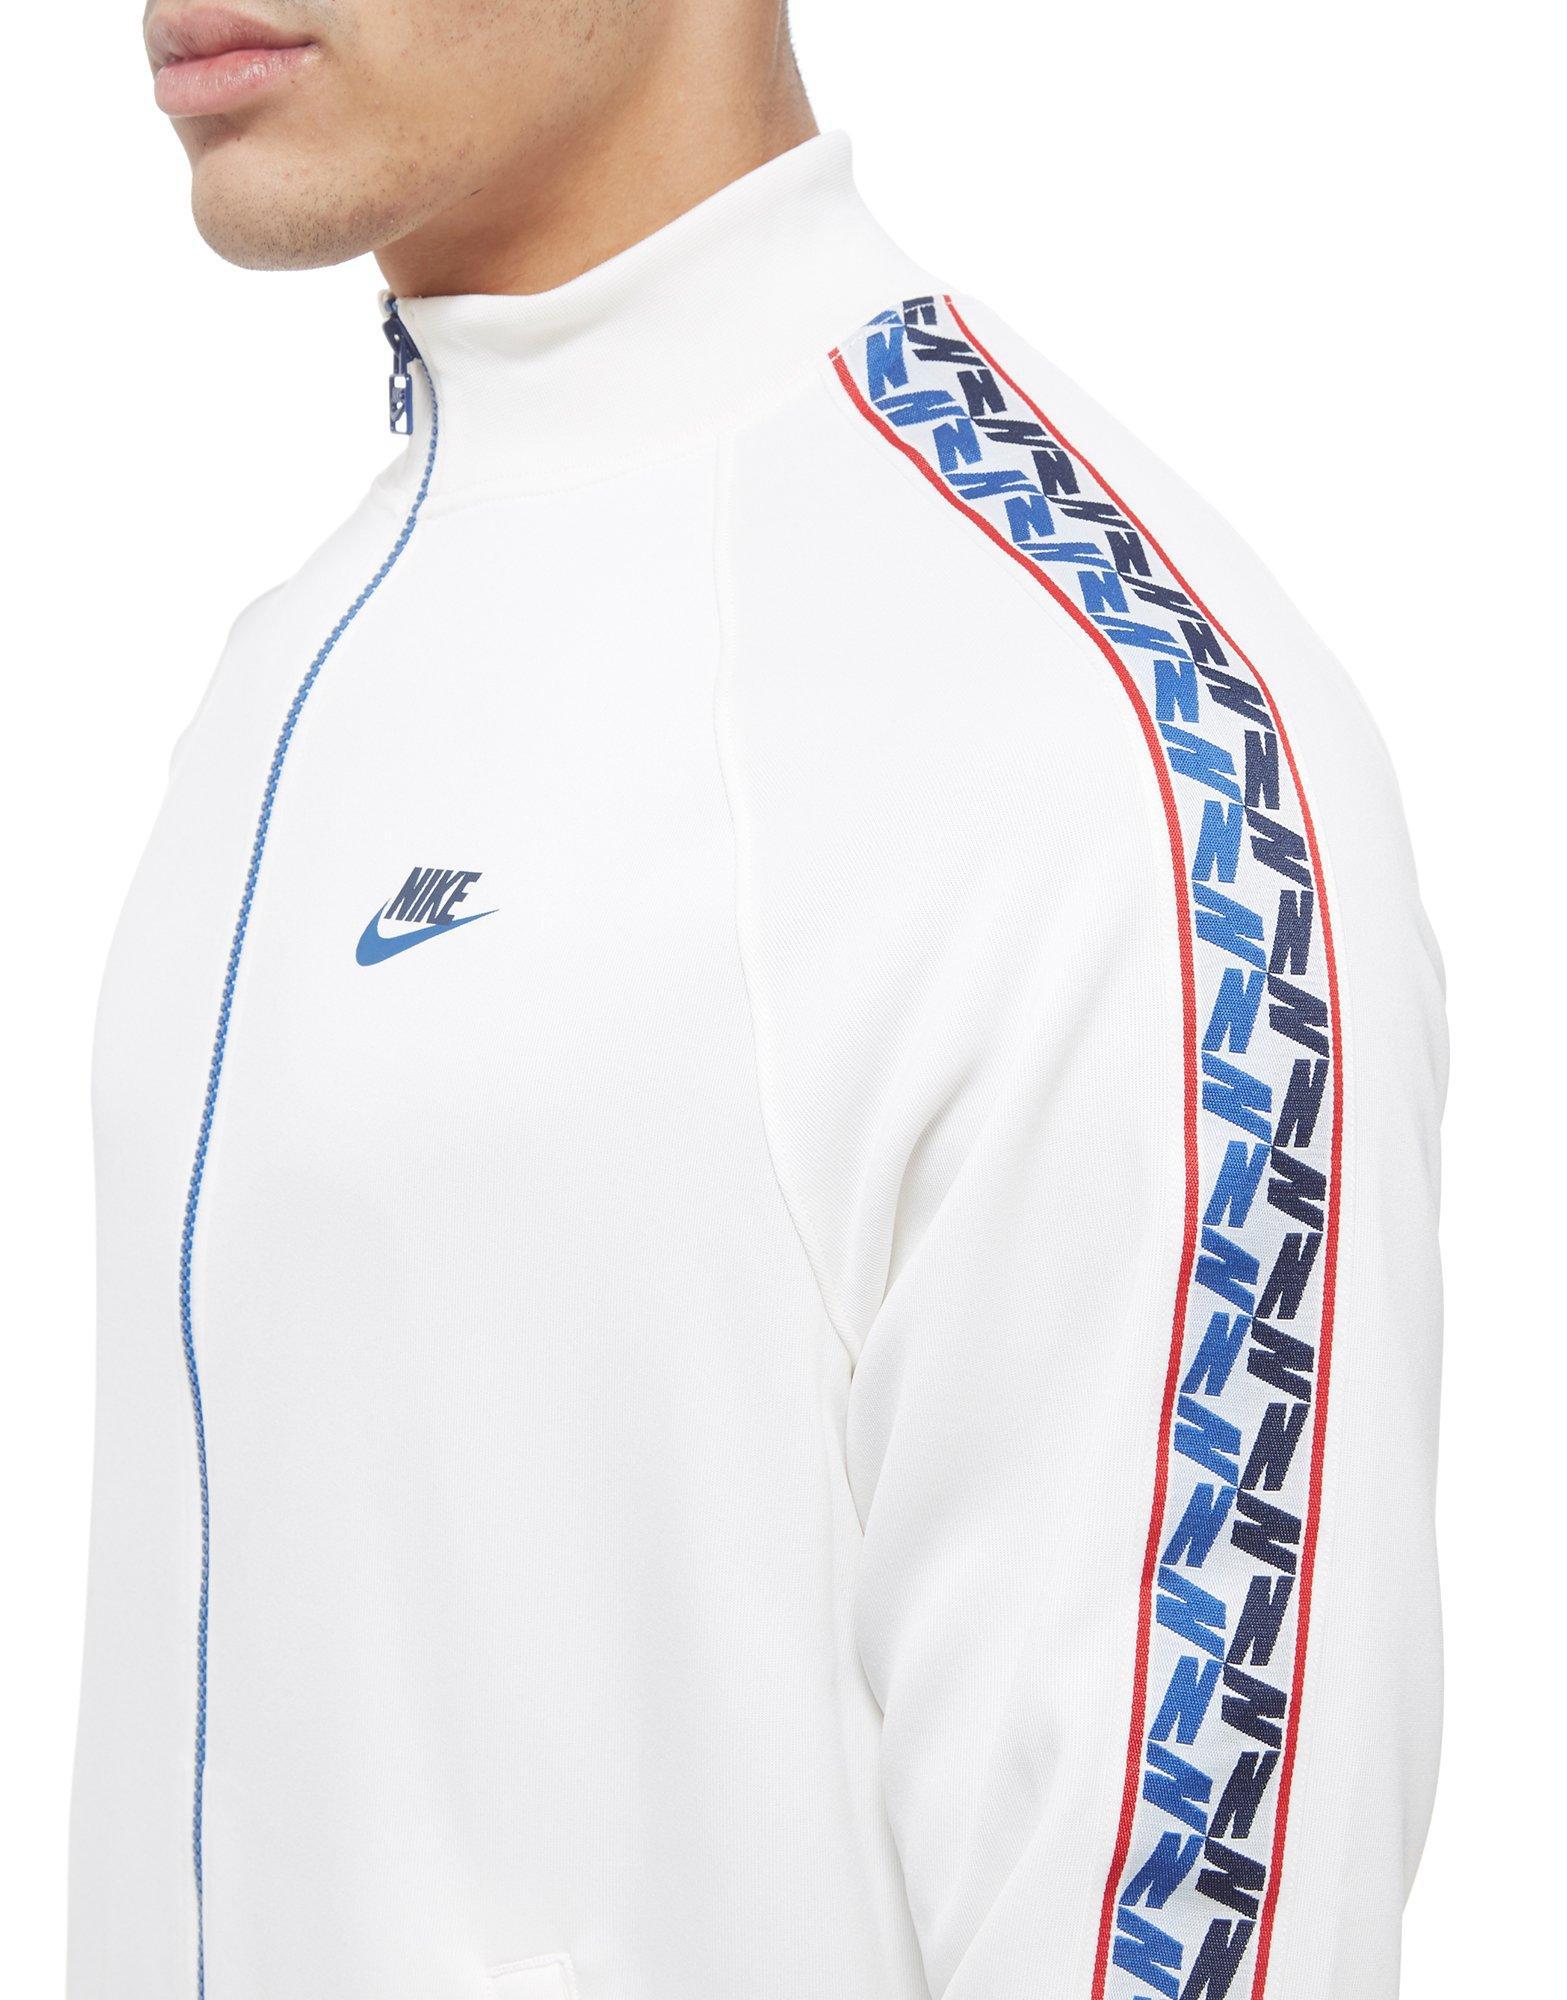 Nike Synthetic Tape Poly Track Top in White/Blue (White) for Men - Lyst